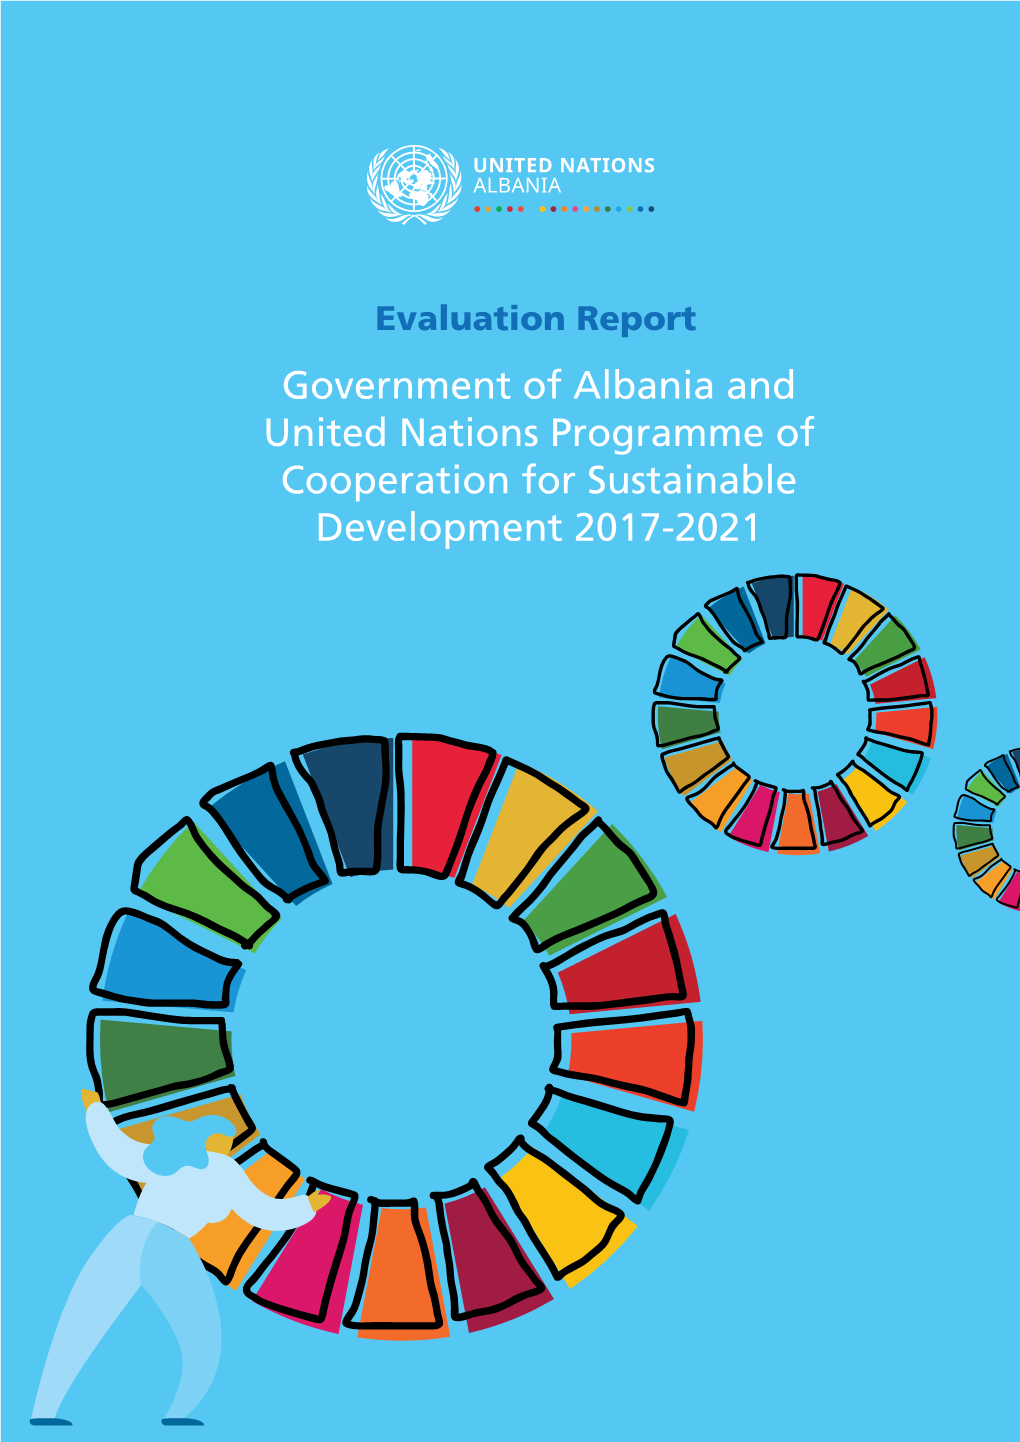 Government of Albania and United Nations Programme of Cooperation for Sustainable Development 2017-2021 Mr